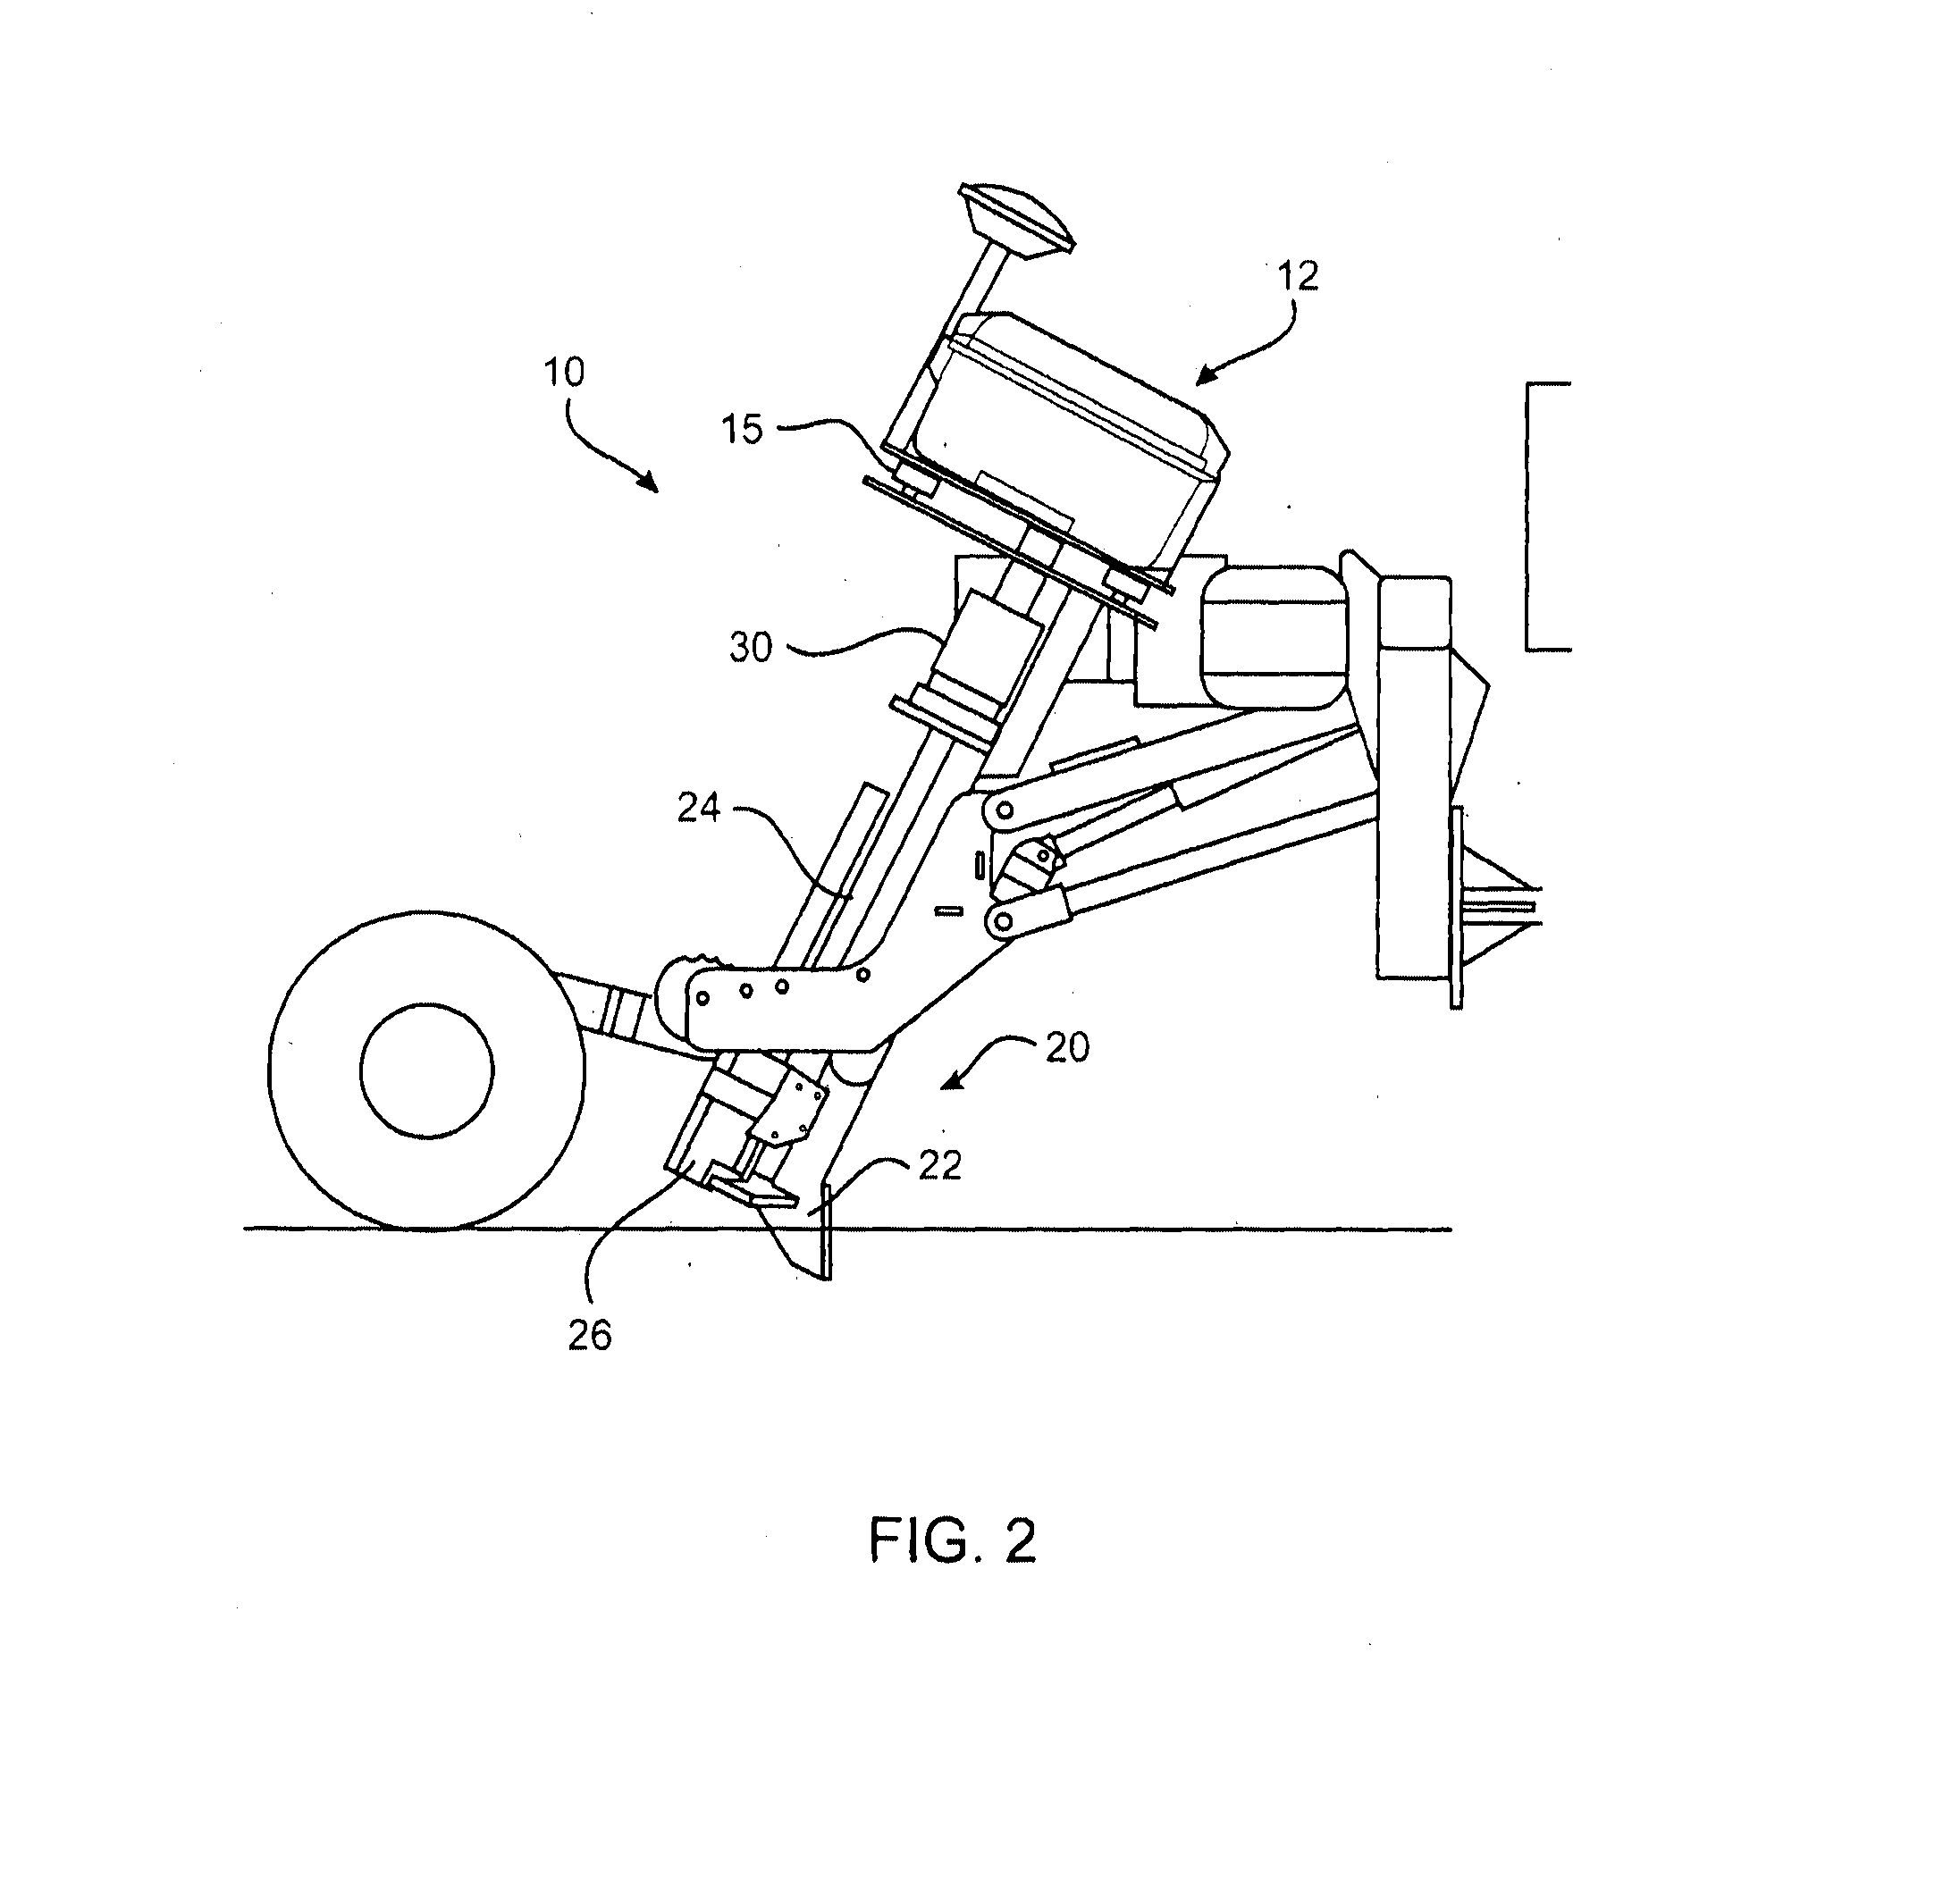 Method, system and apparatus for use in locating subsurface ore bodies